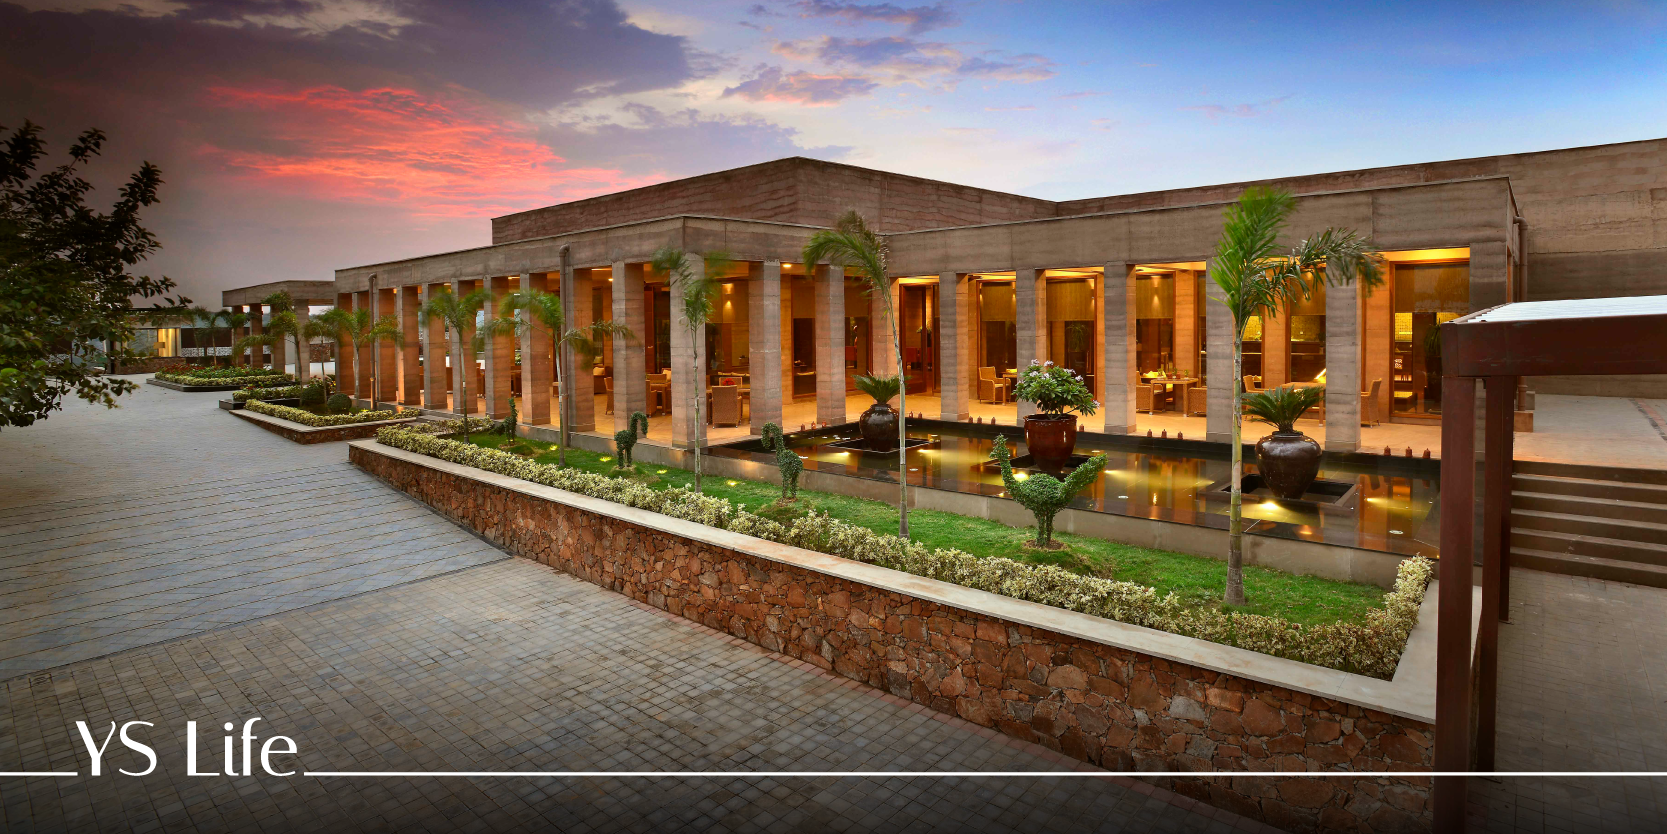 Away from the city’s chaos, LaLiT Mangar offers a rustic escape only an hour’s drive from Delhi 